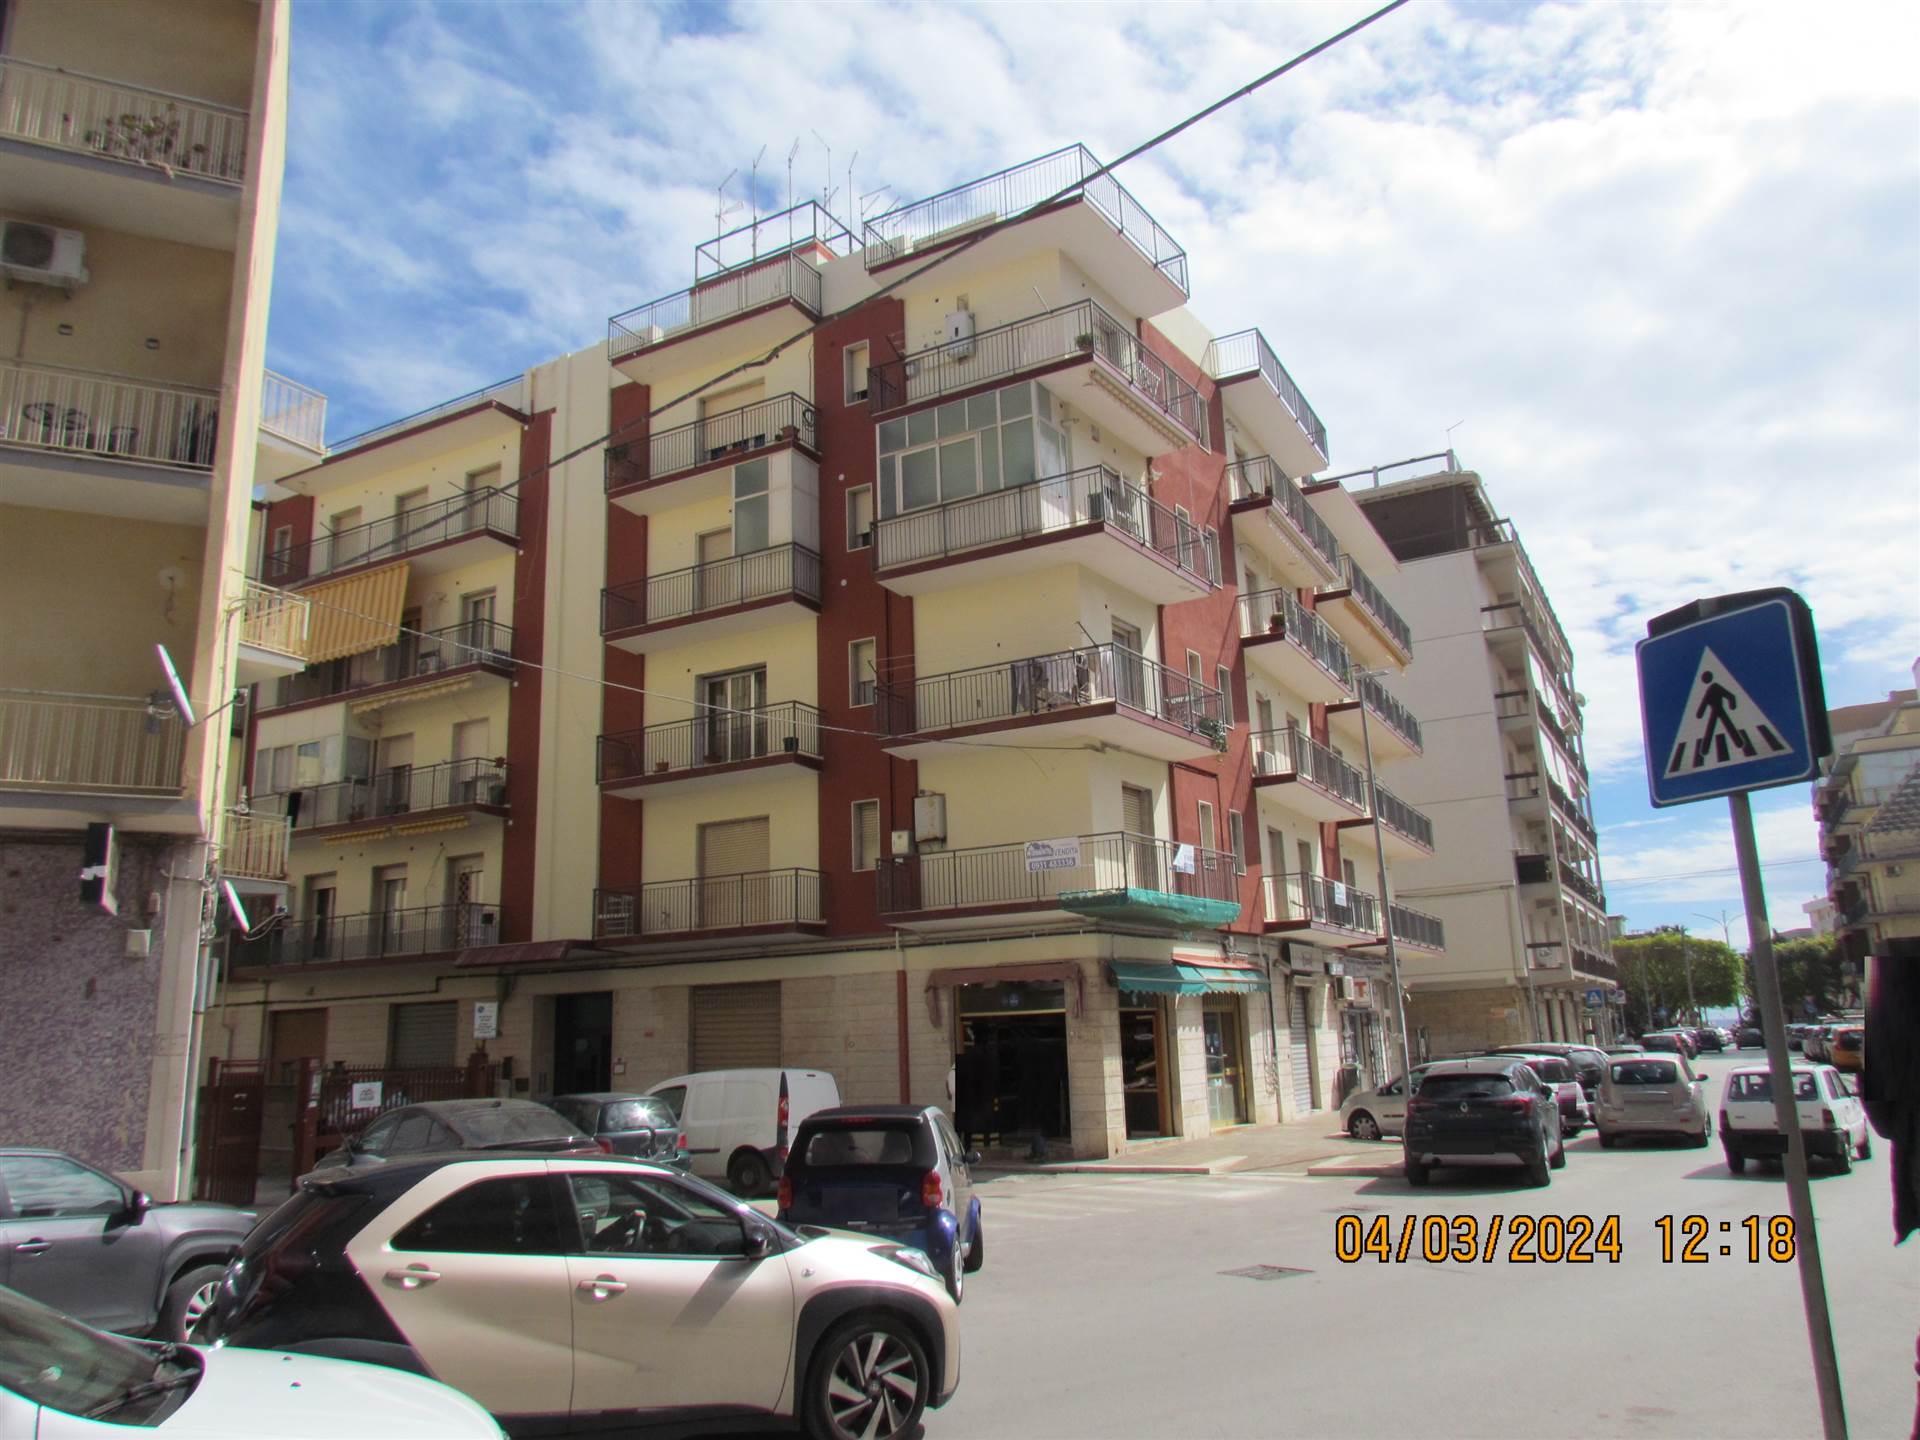 We have a 130 square meters apartment, located on the first floor and composed of: entrance hall, living room, two bedrooms, kitchen, bathroom, 